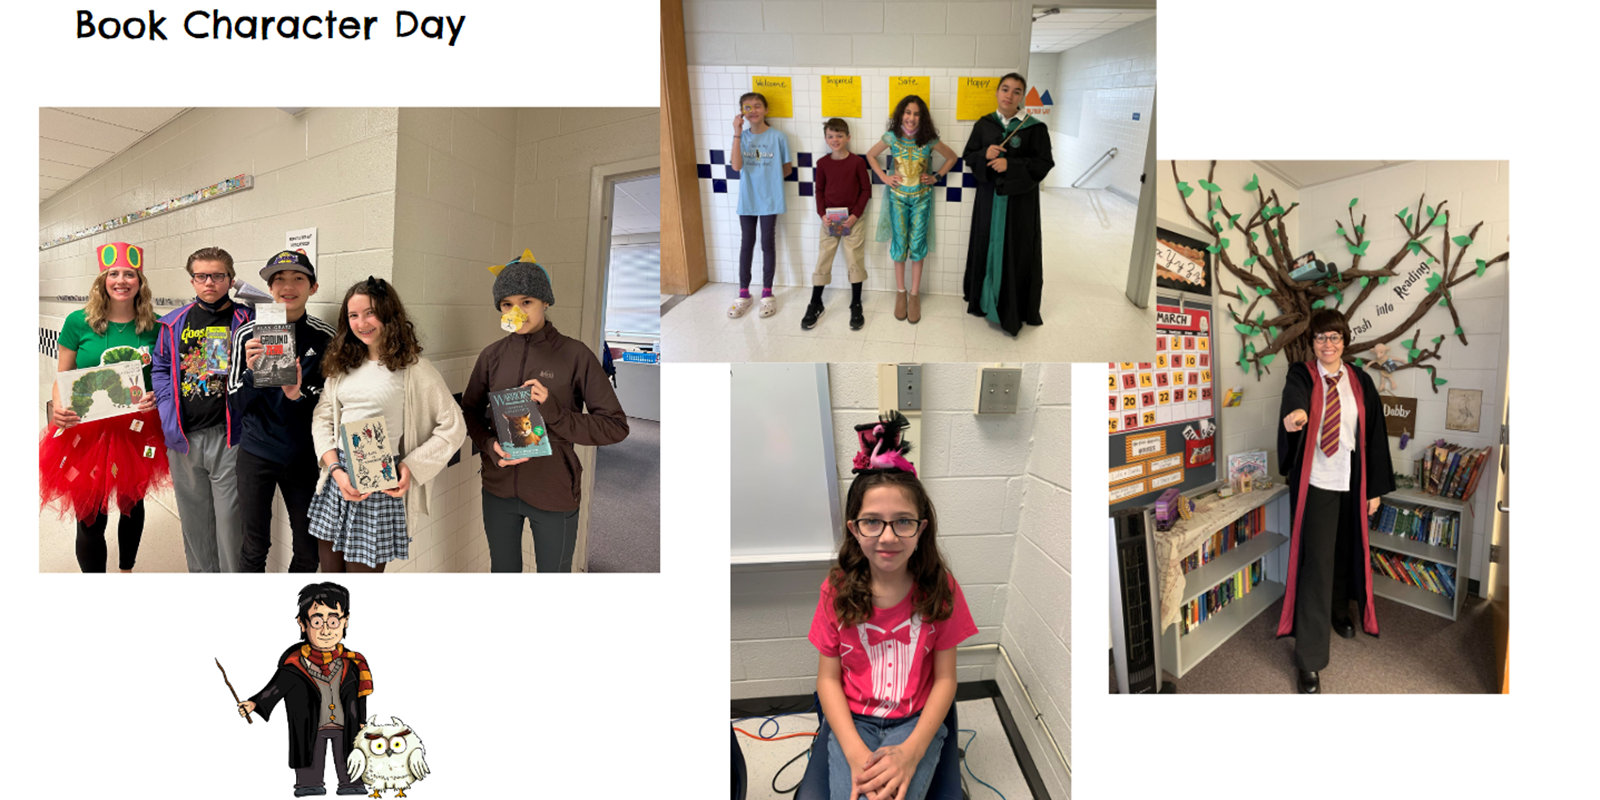 Staff and students dressed as book characters. 